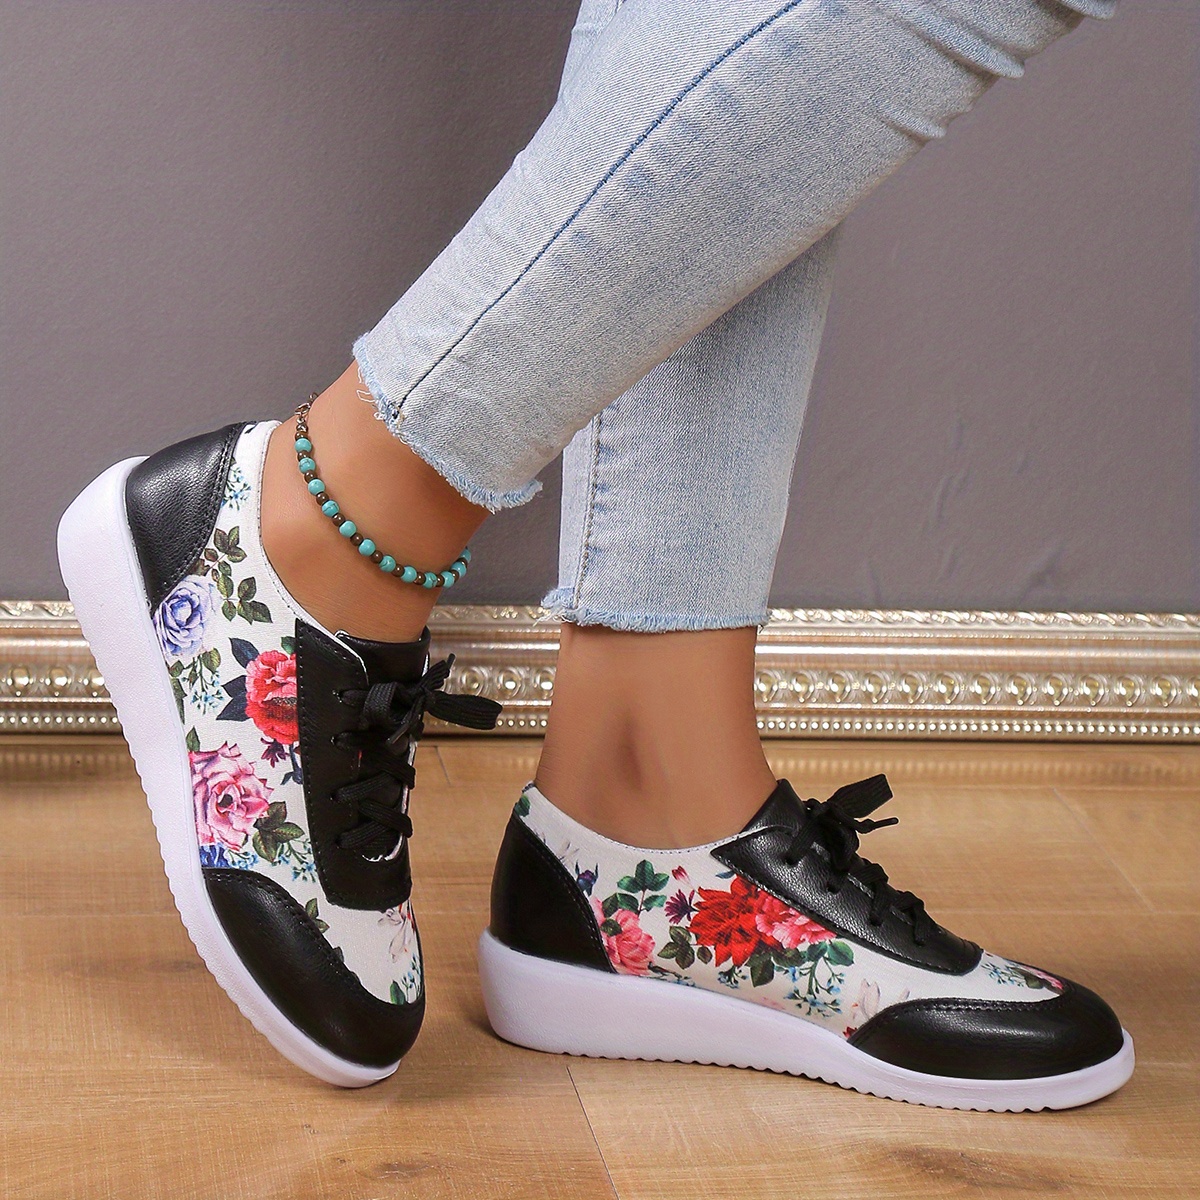 womens floral print sneakers lace up low top round toe non slip outdoor lightweight trainers casual versatile shoes details 1